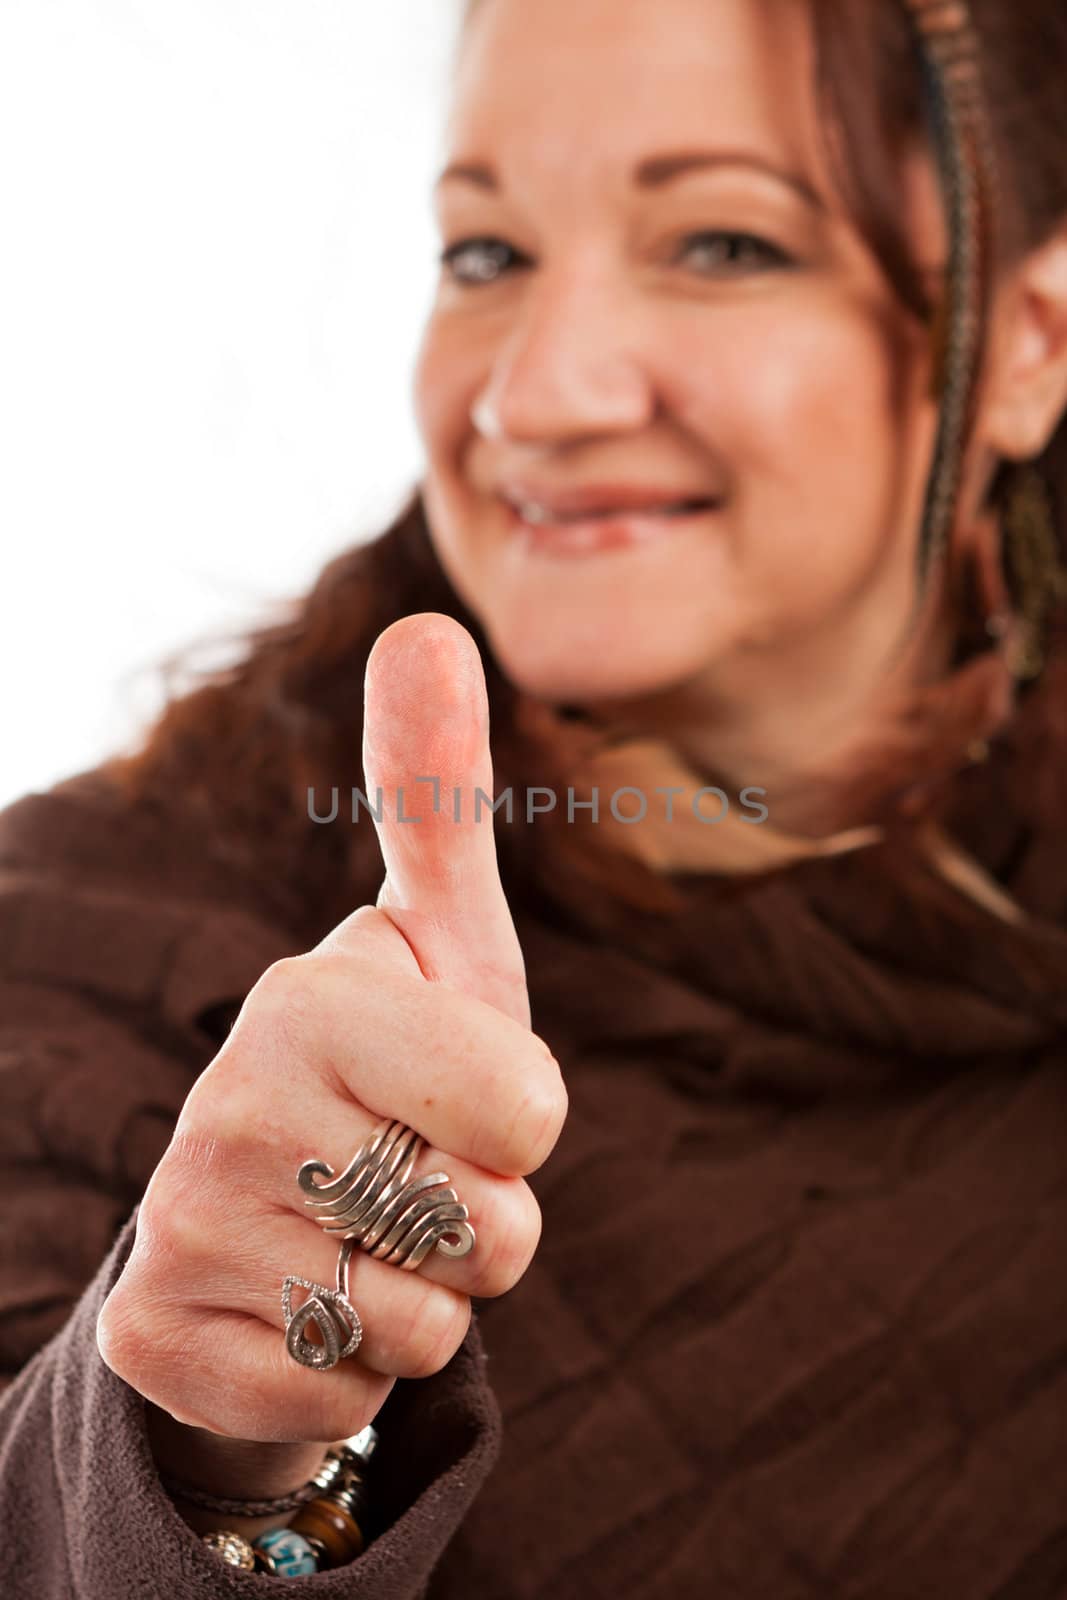 Middle aged woman smiling and holding her thumb up in approval.  Shallow depth of field.